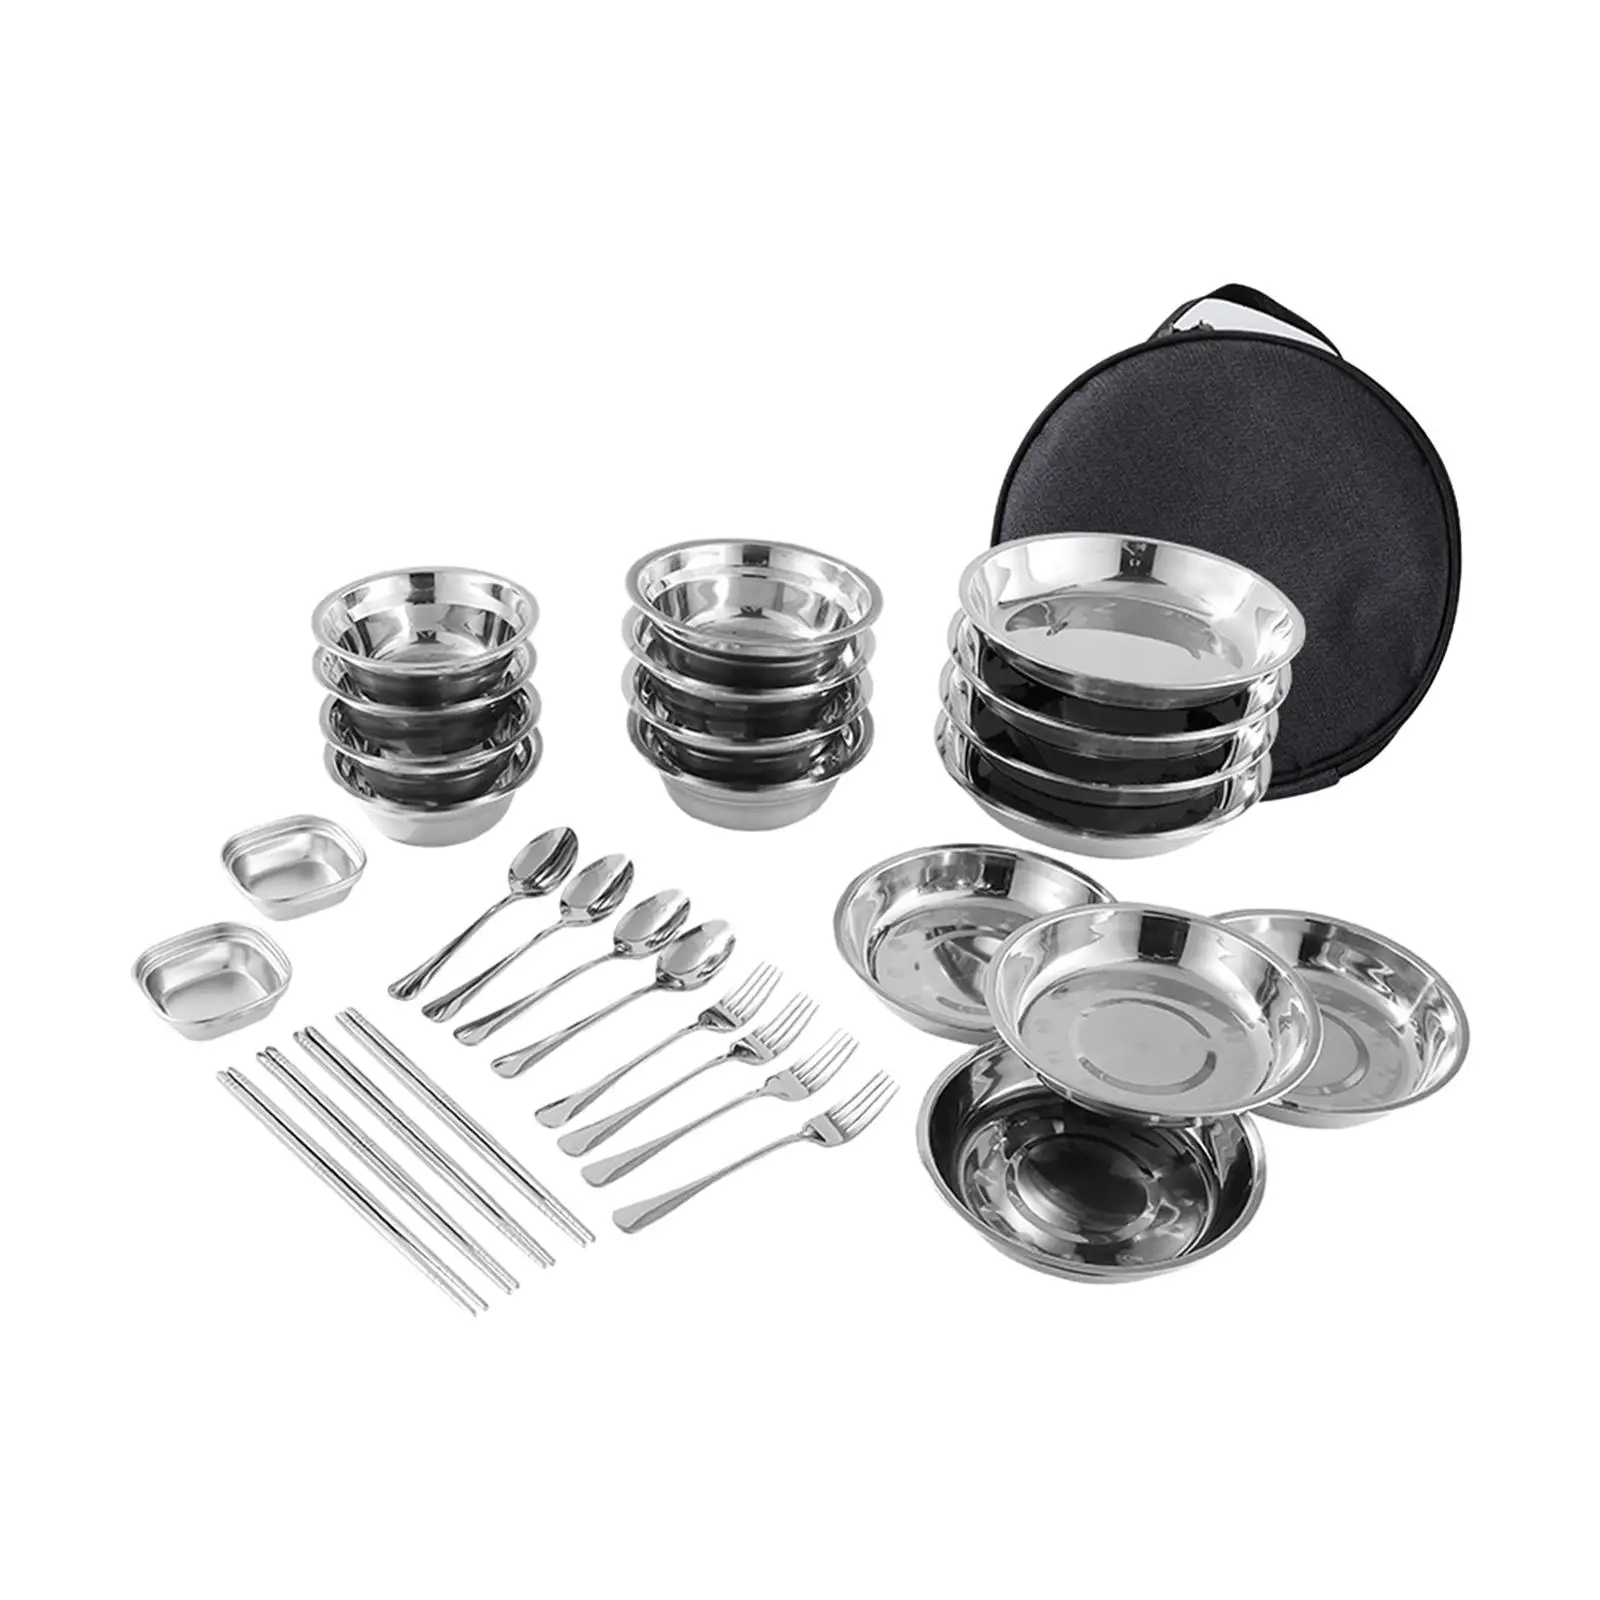 Stainless Steel Plates and Bowls Camping Set Dinner Plate Camping Mess Set for